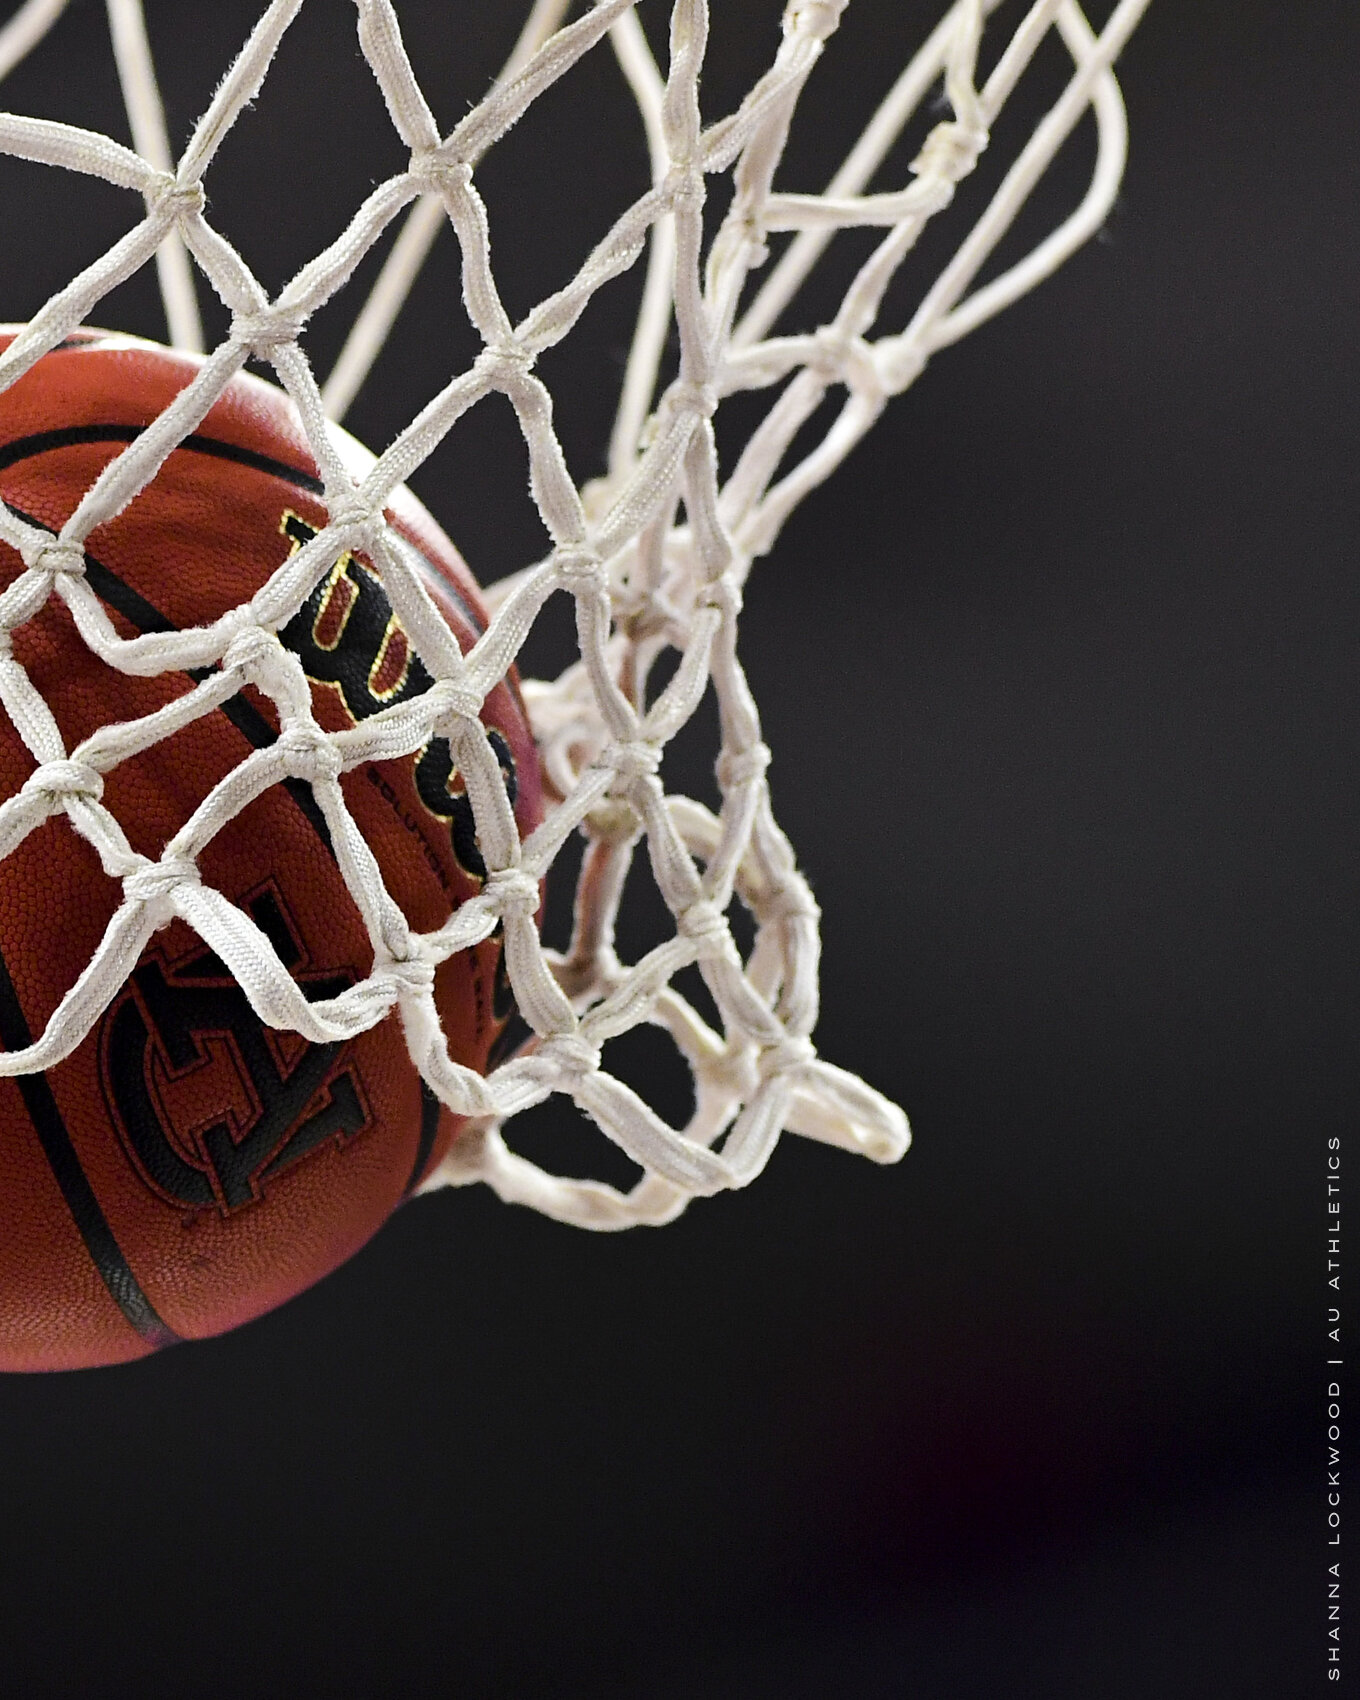  Dec 13, 2020; Auburn, AL, USA; View of a basketball in the net during the women’s basketball game against South Alabama at Auburn Arena. Mandatory Credit: Shanna Lockwood/AU Athletics 